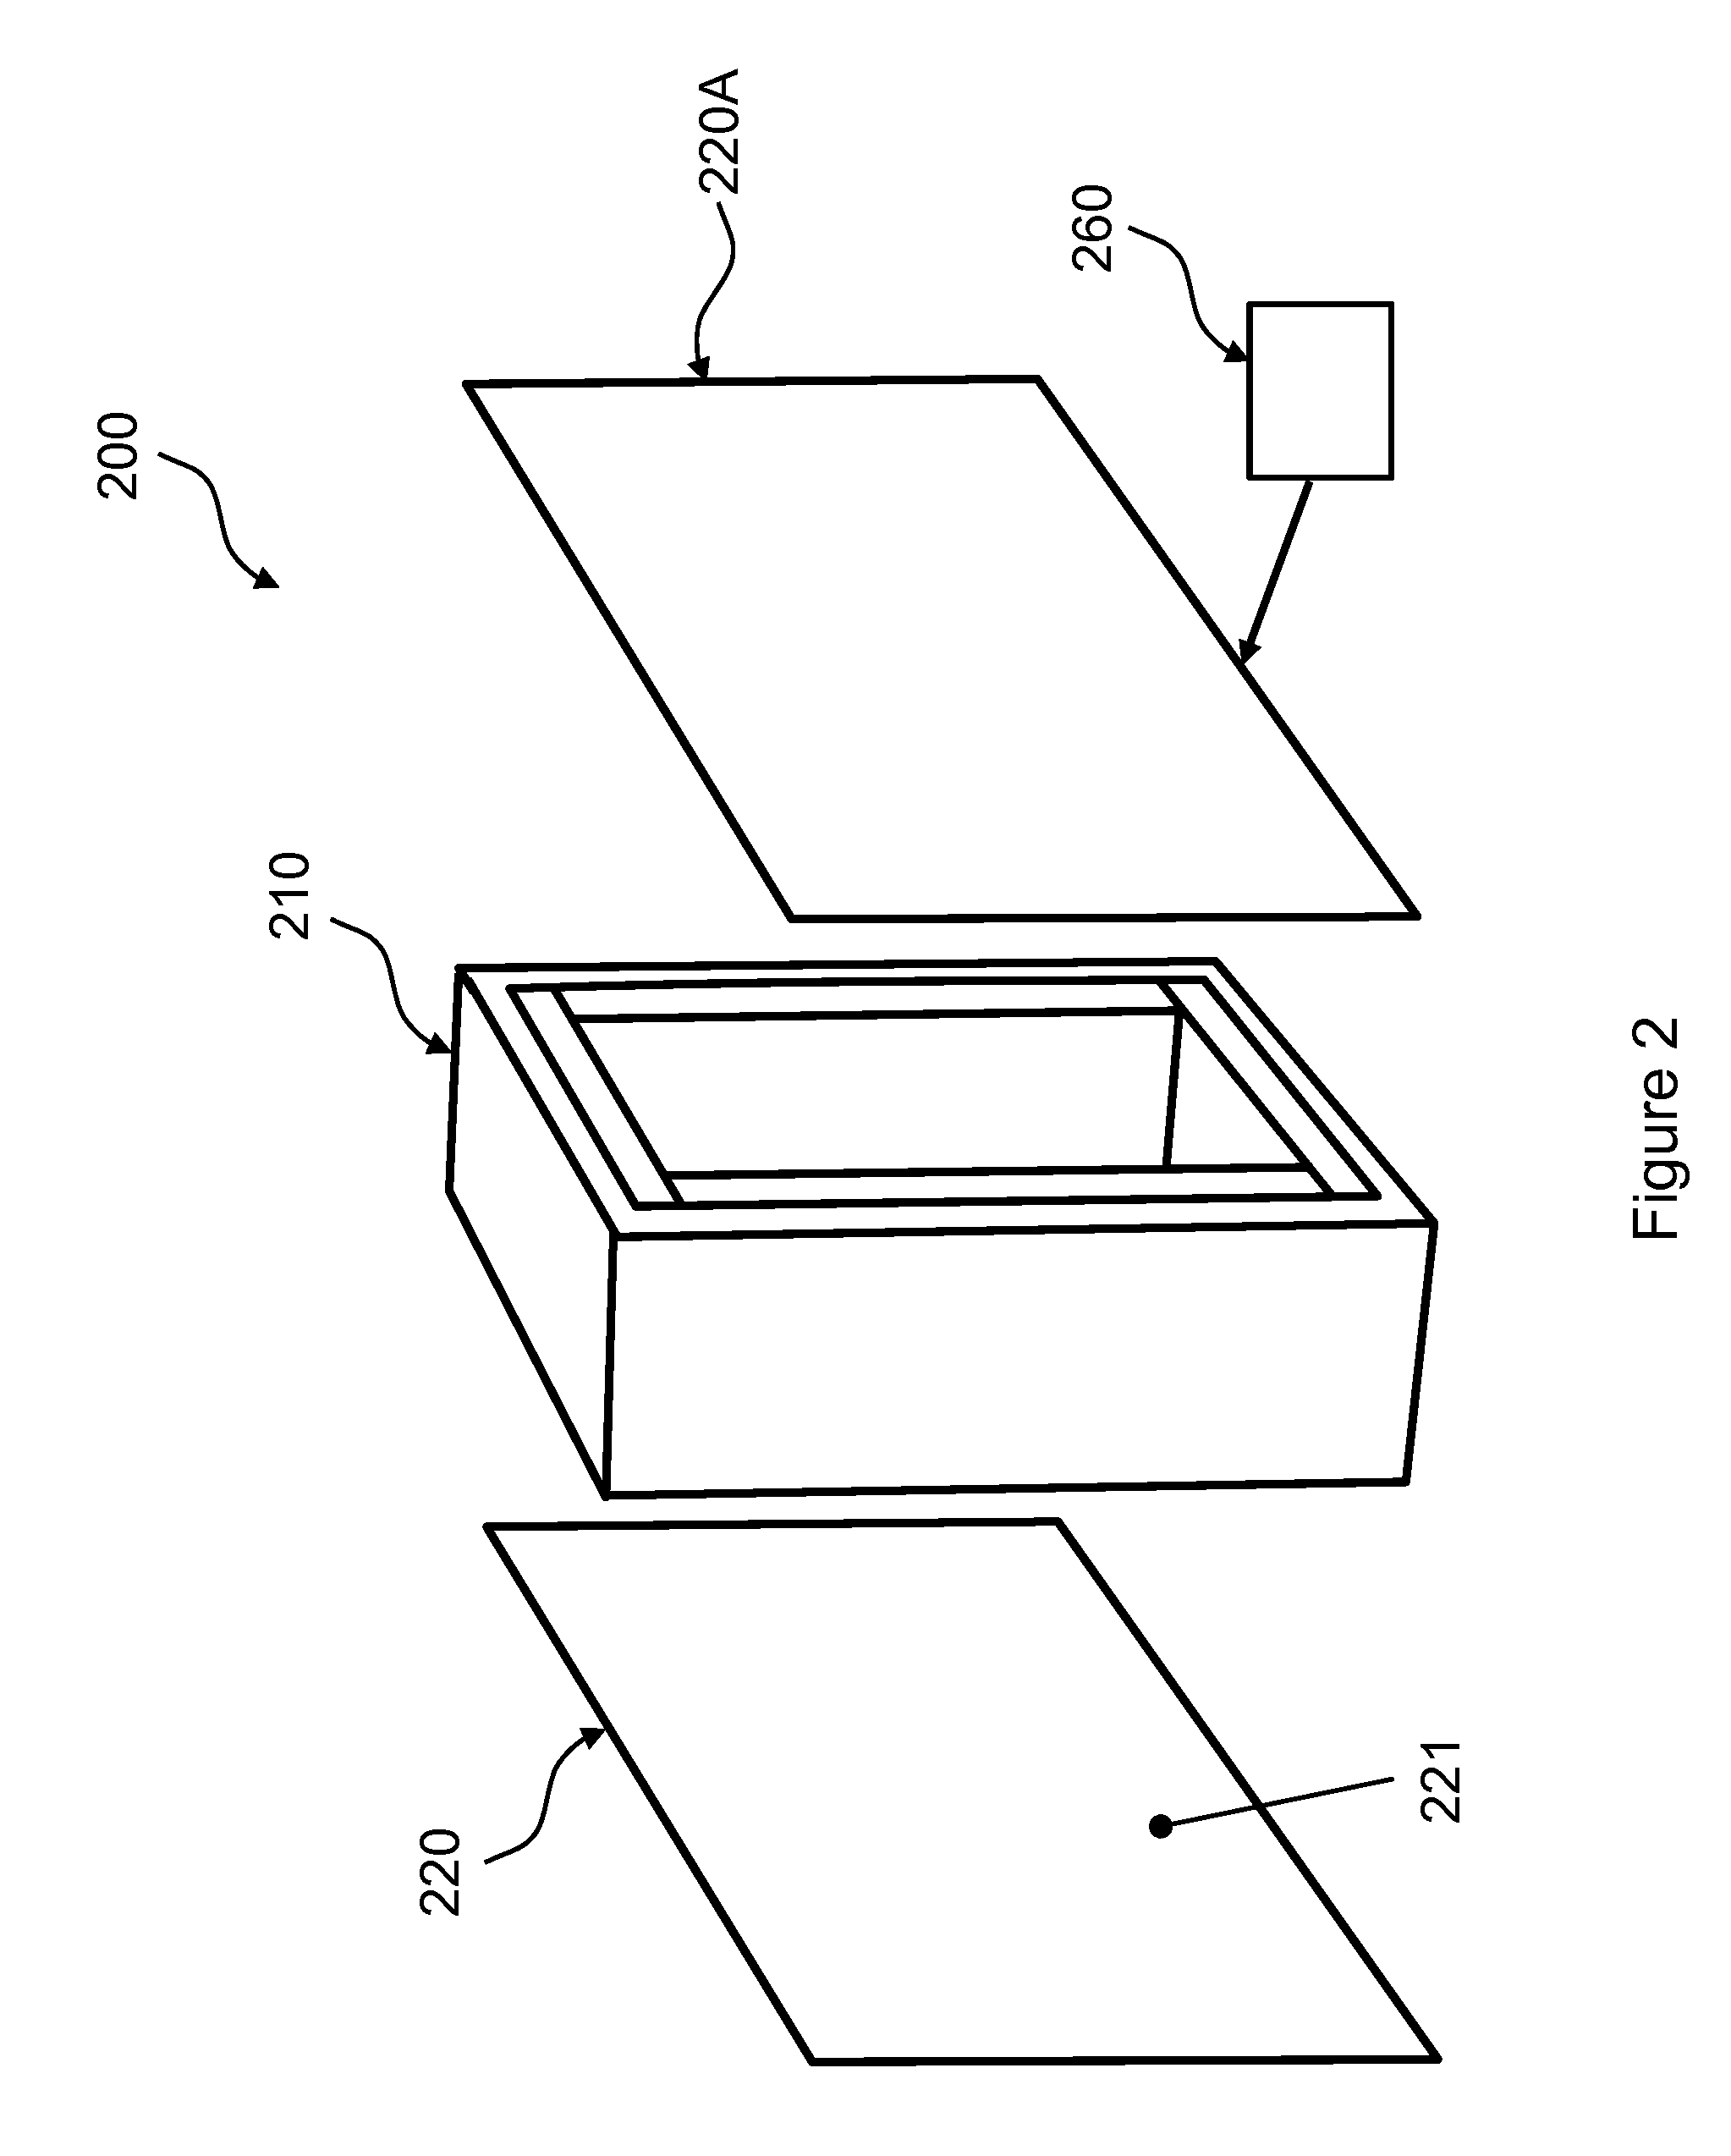 Film deposition apparatus with low plasma damage and low processing temperature